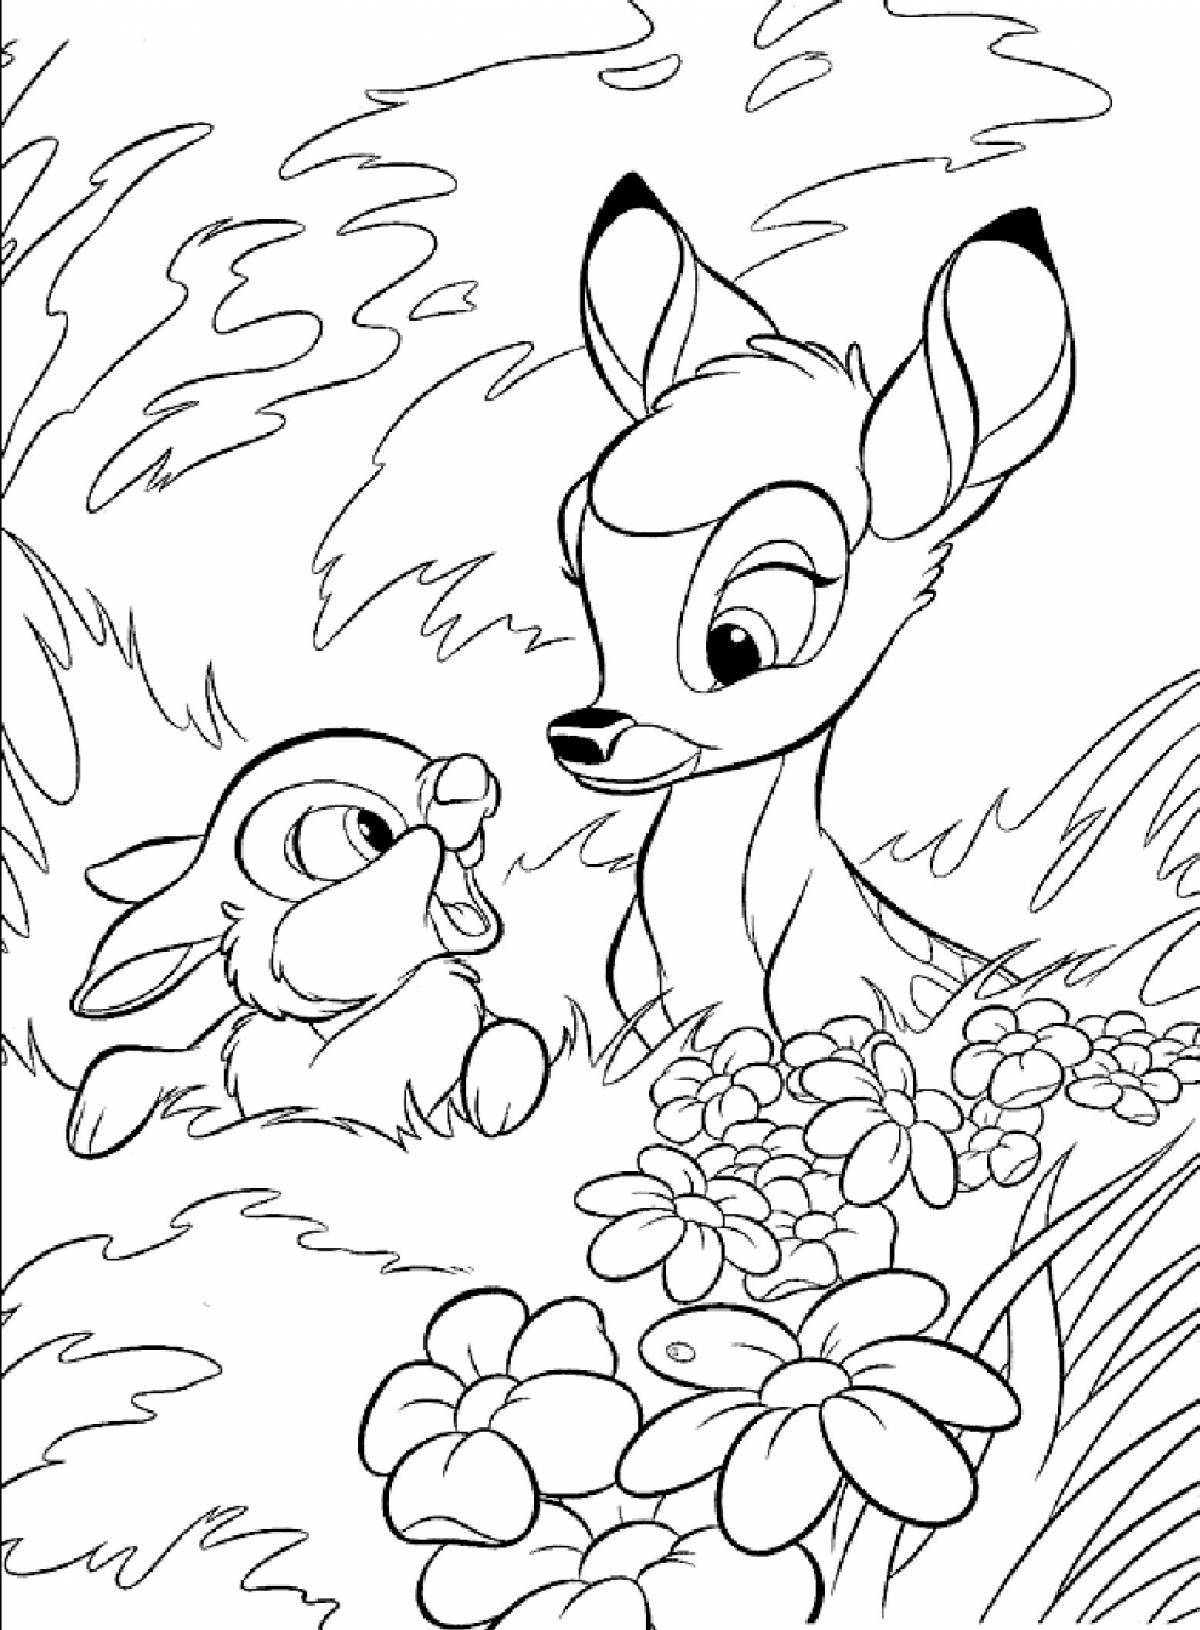 Color-bright coloring book for children 6-7 years old from cartoons